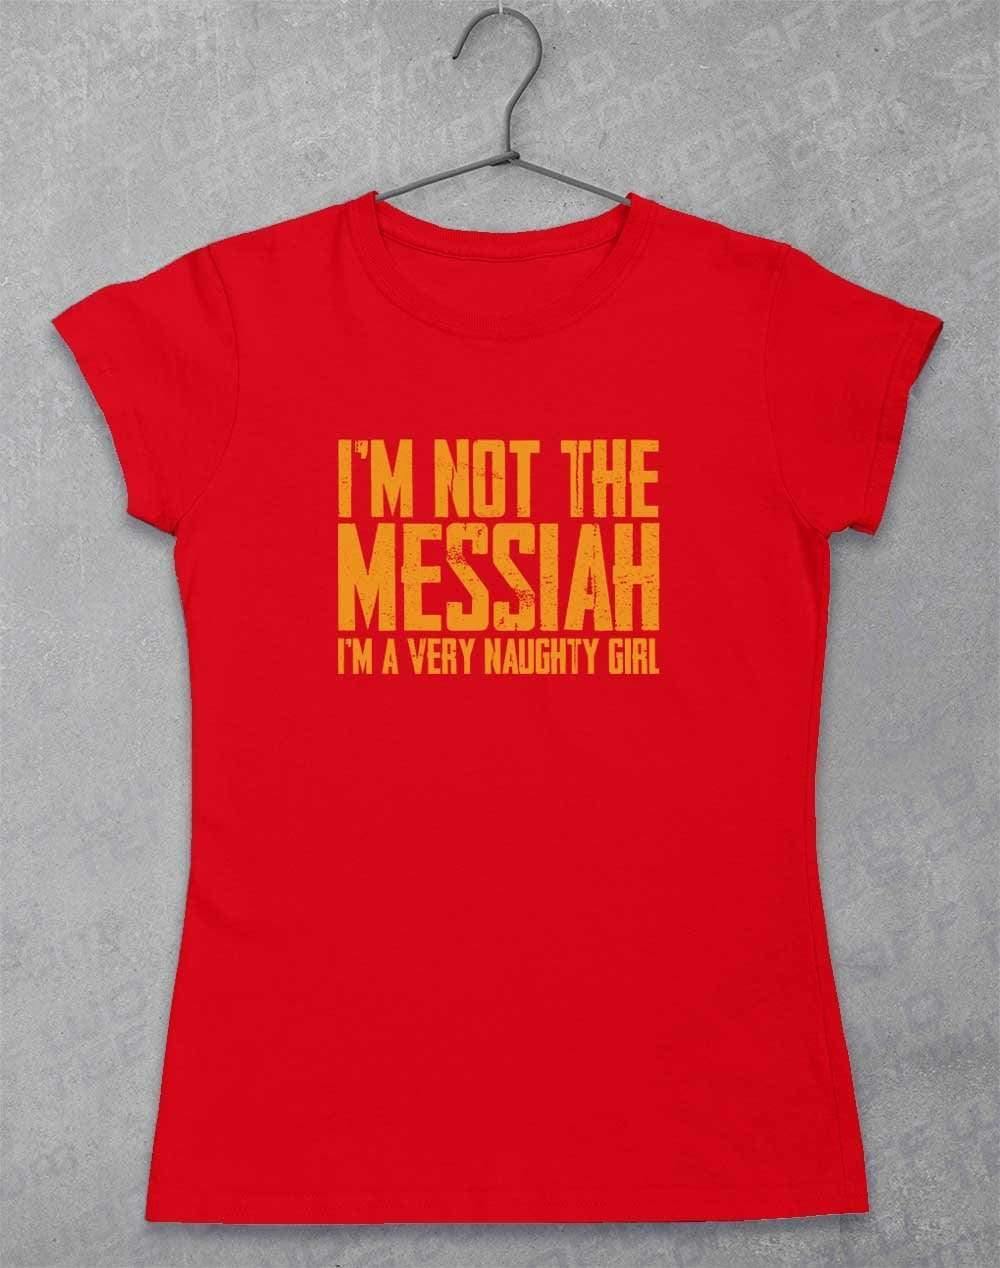 I'm Not the Messiah I'm a Very Naughty Girl Womens T-Shirt 8-10 / Red  - Off World Tees